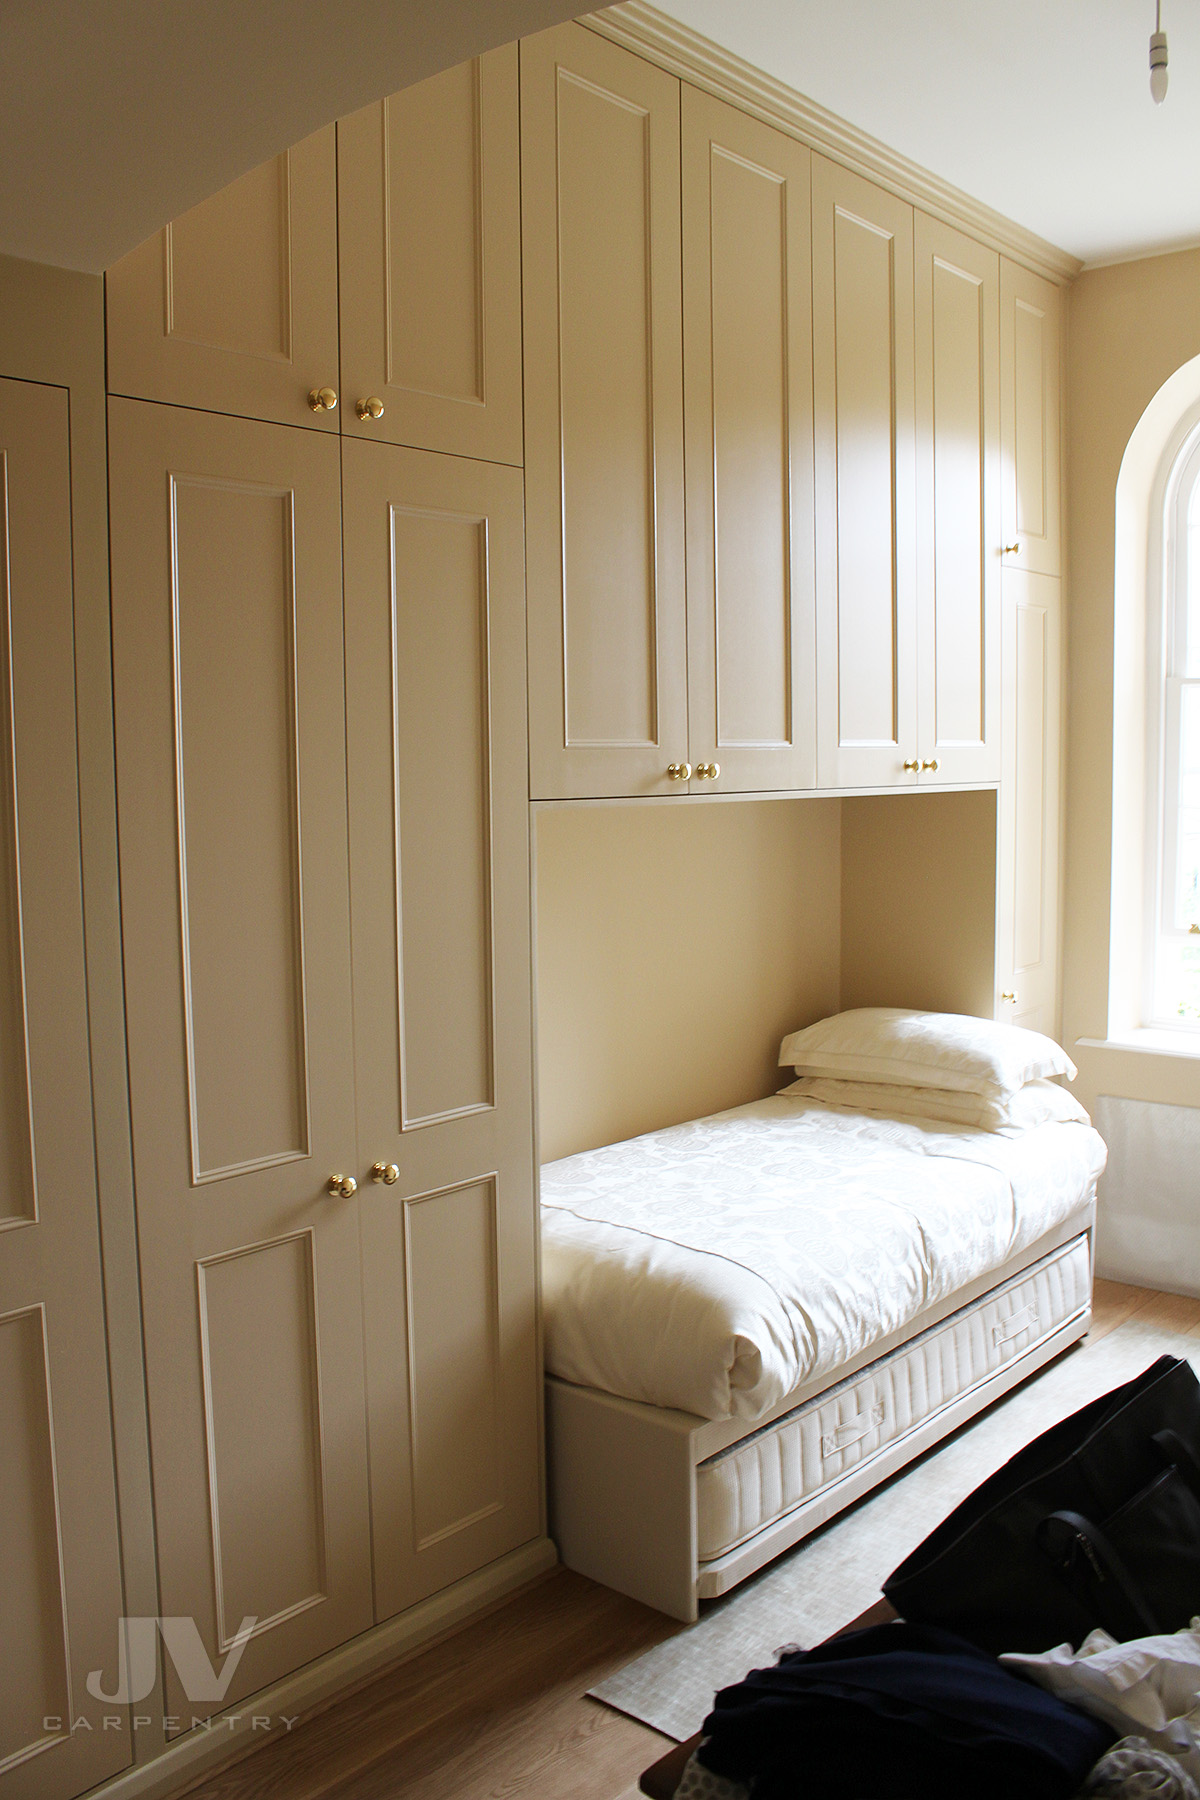 12 Fitted Wardrobes Over Bed Ideas For, Built Ins Around Bed